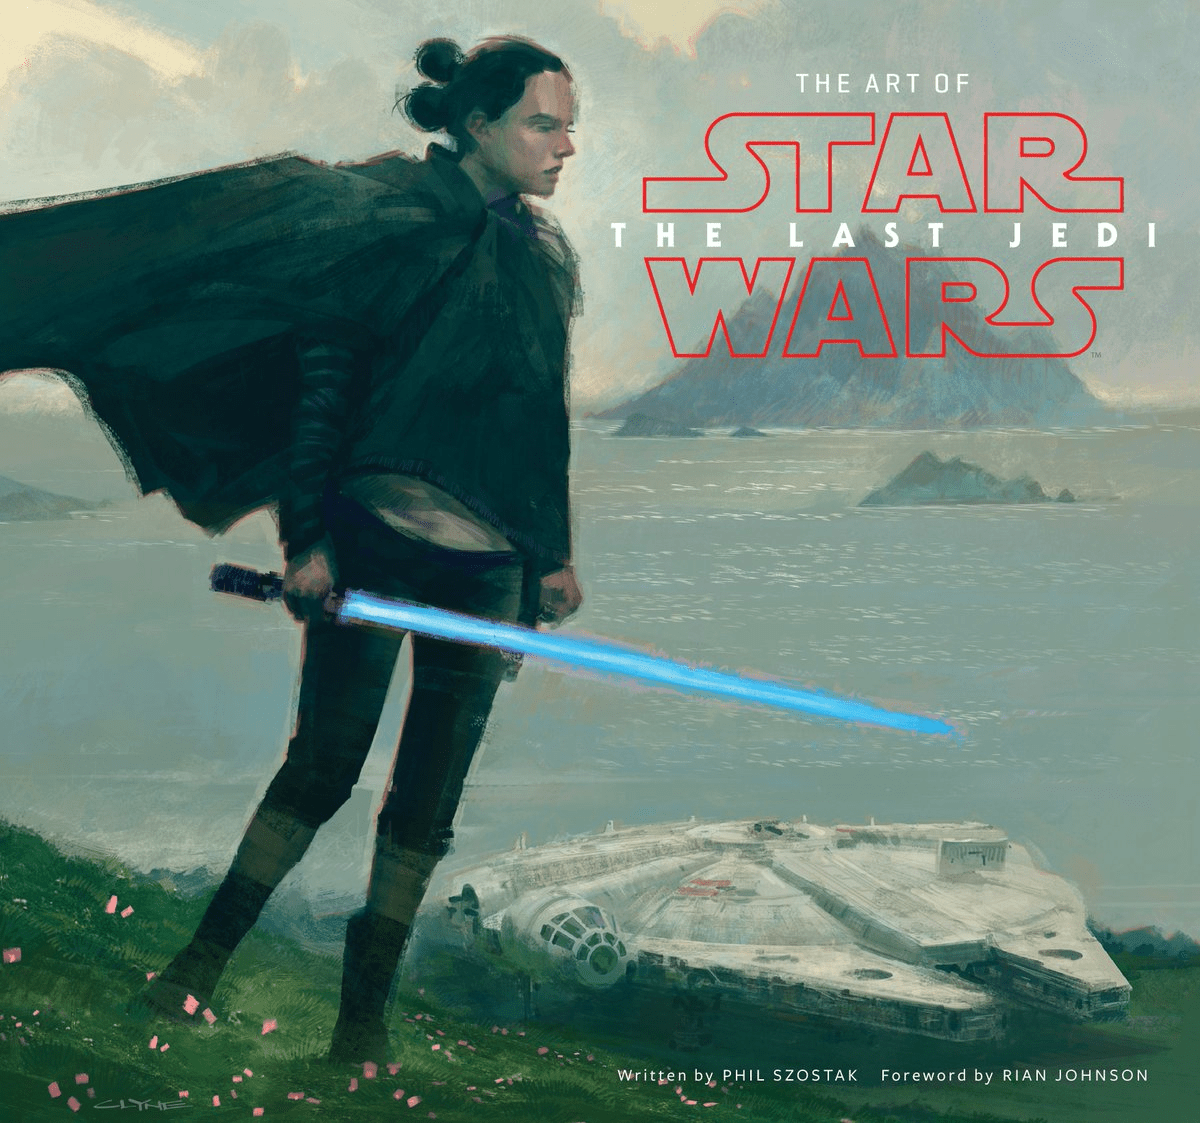 An Exclusive Look At The Stunning Concept Art Of Star Wars: The Last Jedi 